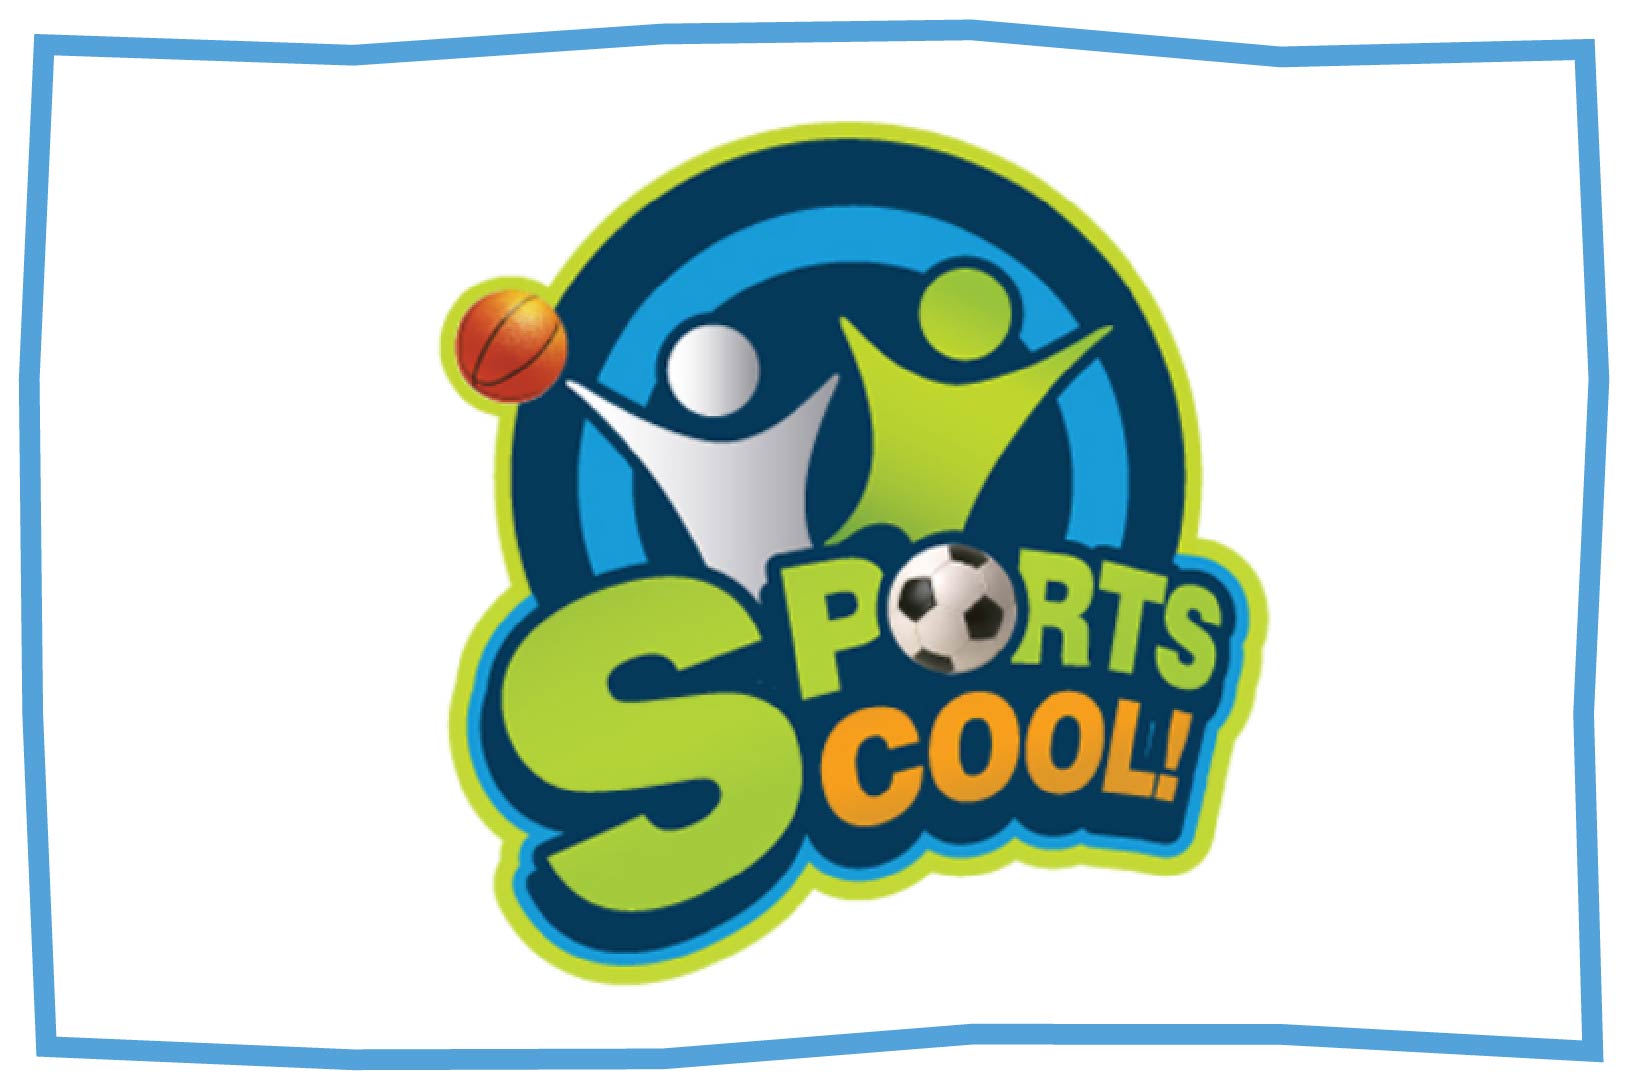 Sports Cool Holiday Club